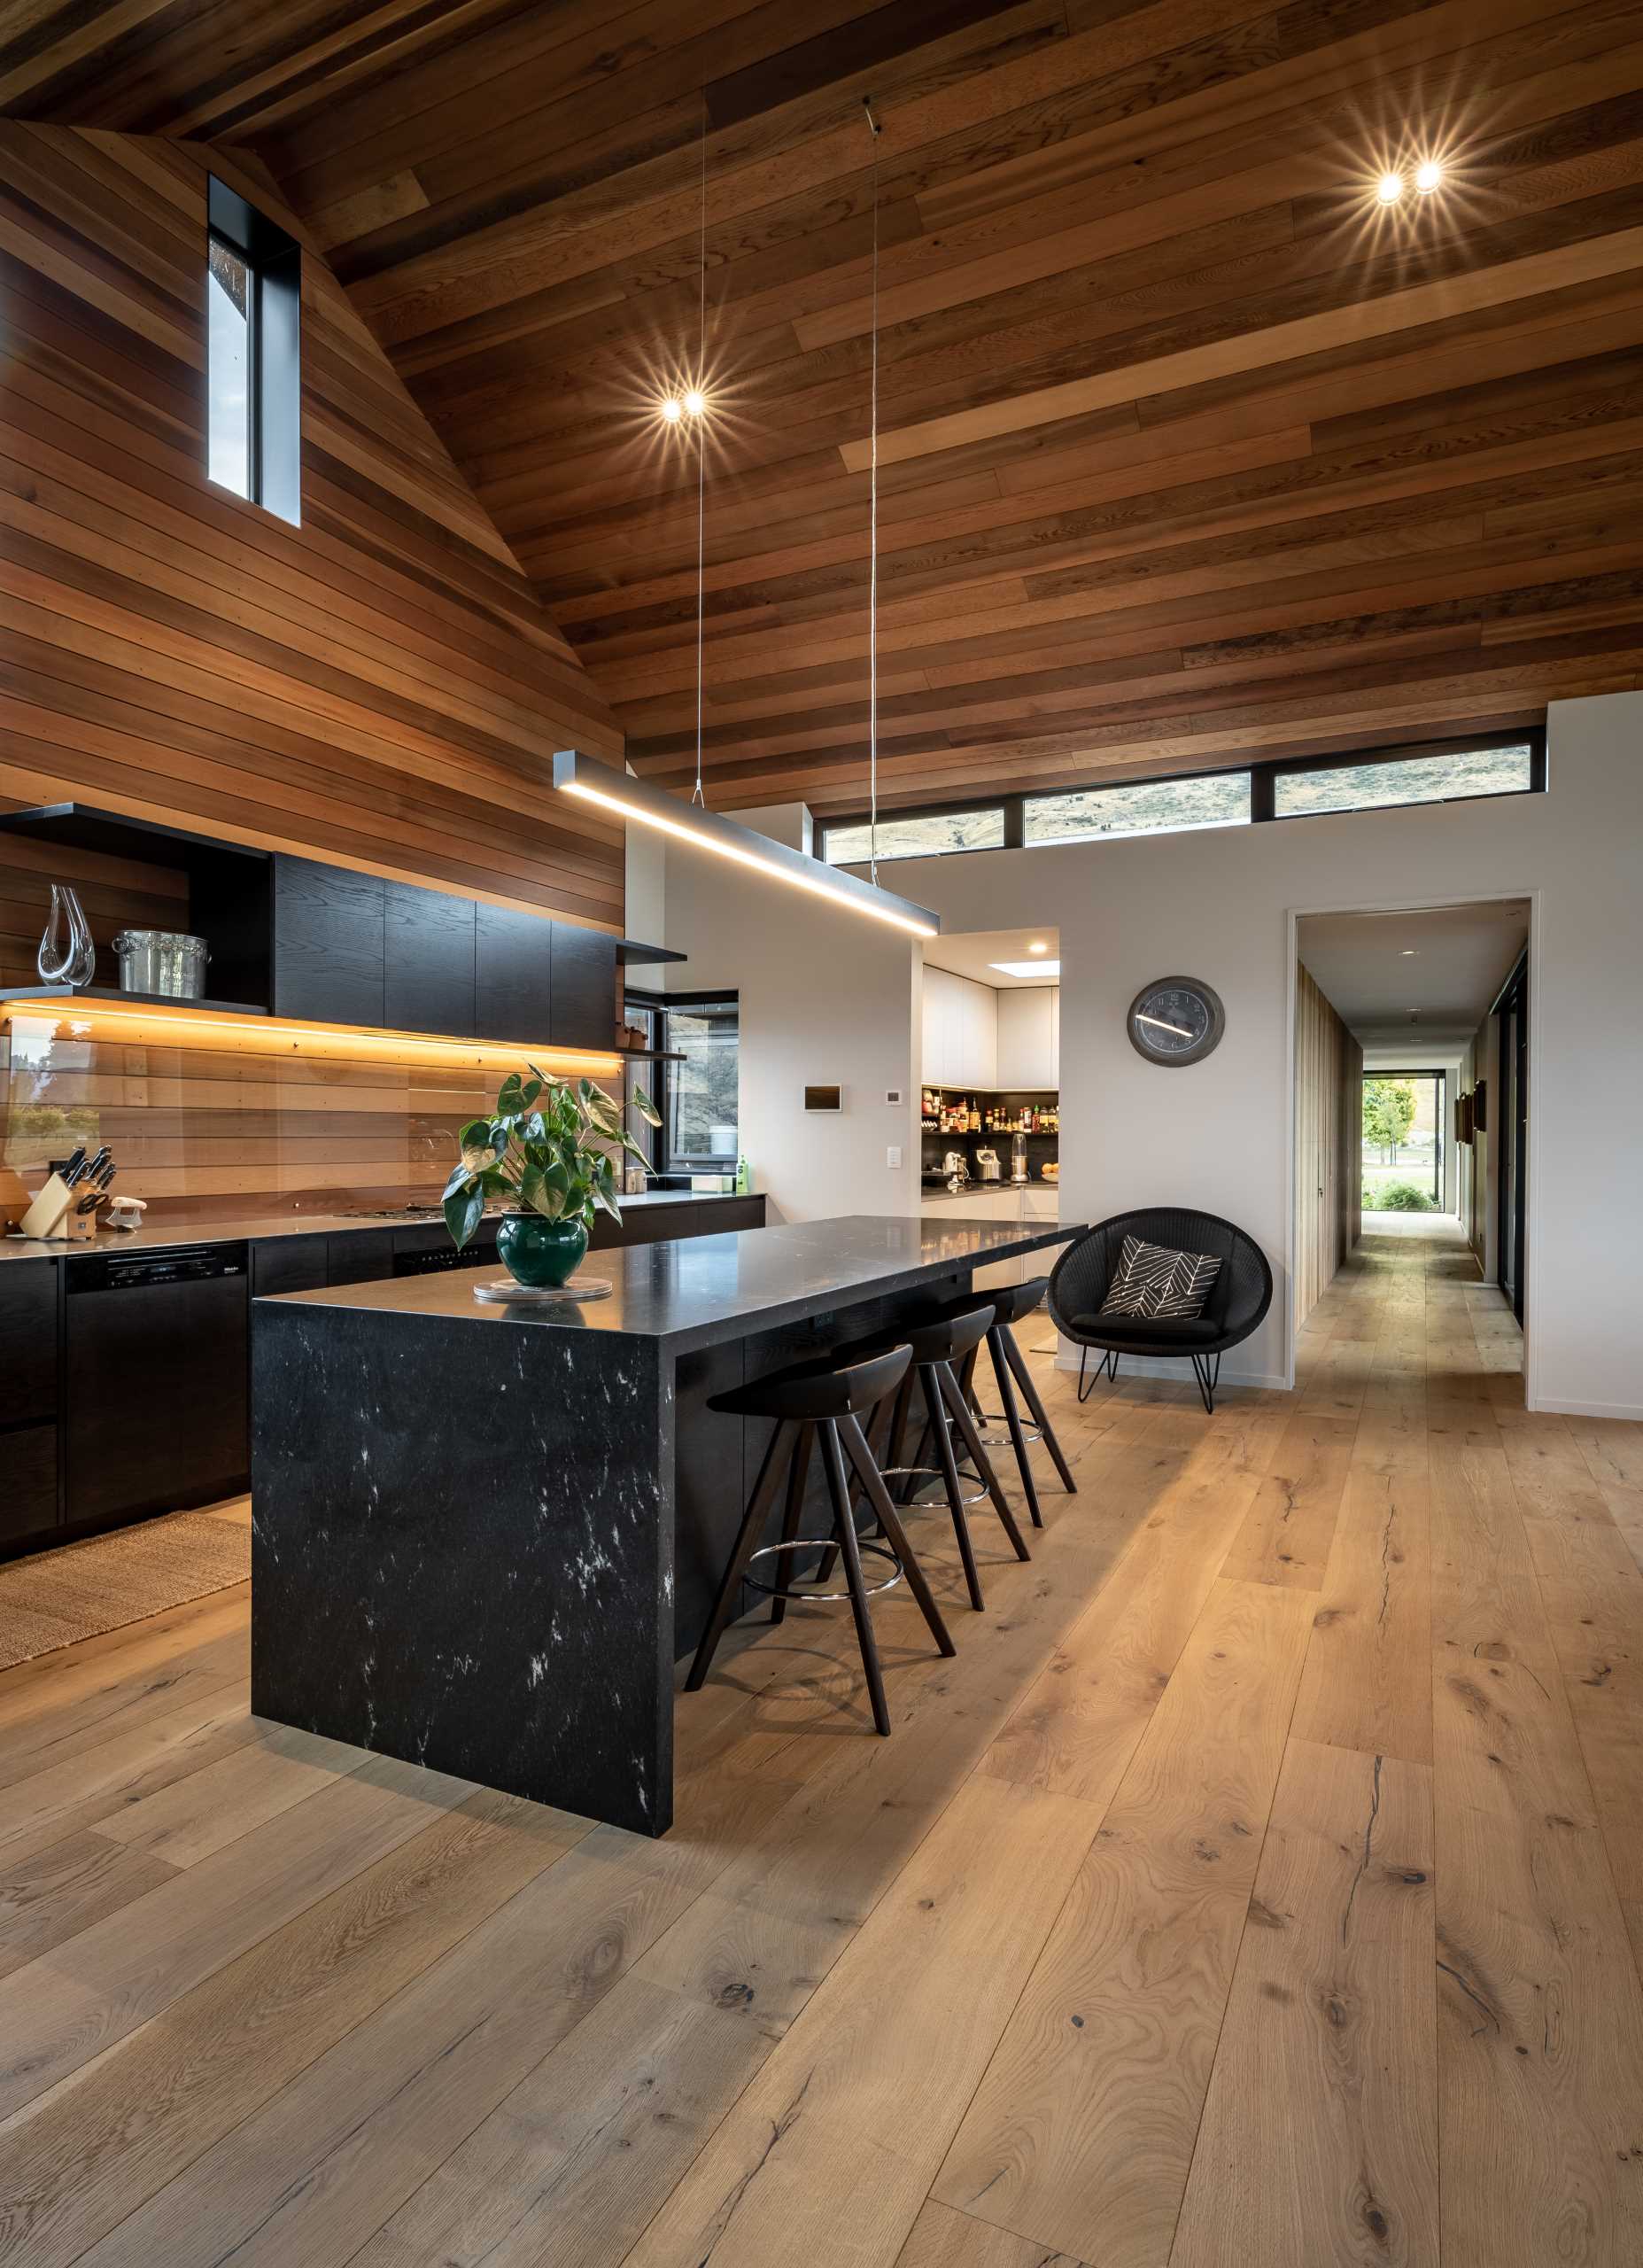 In this modern kitchen, the dark cabinets contrast the wood on the ceiling and walls, while a glass backsplash protects the wood, and hidden lighting highlights it.